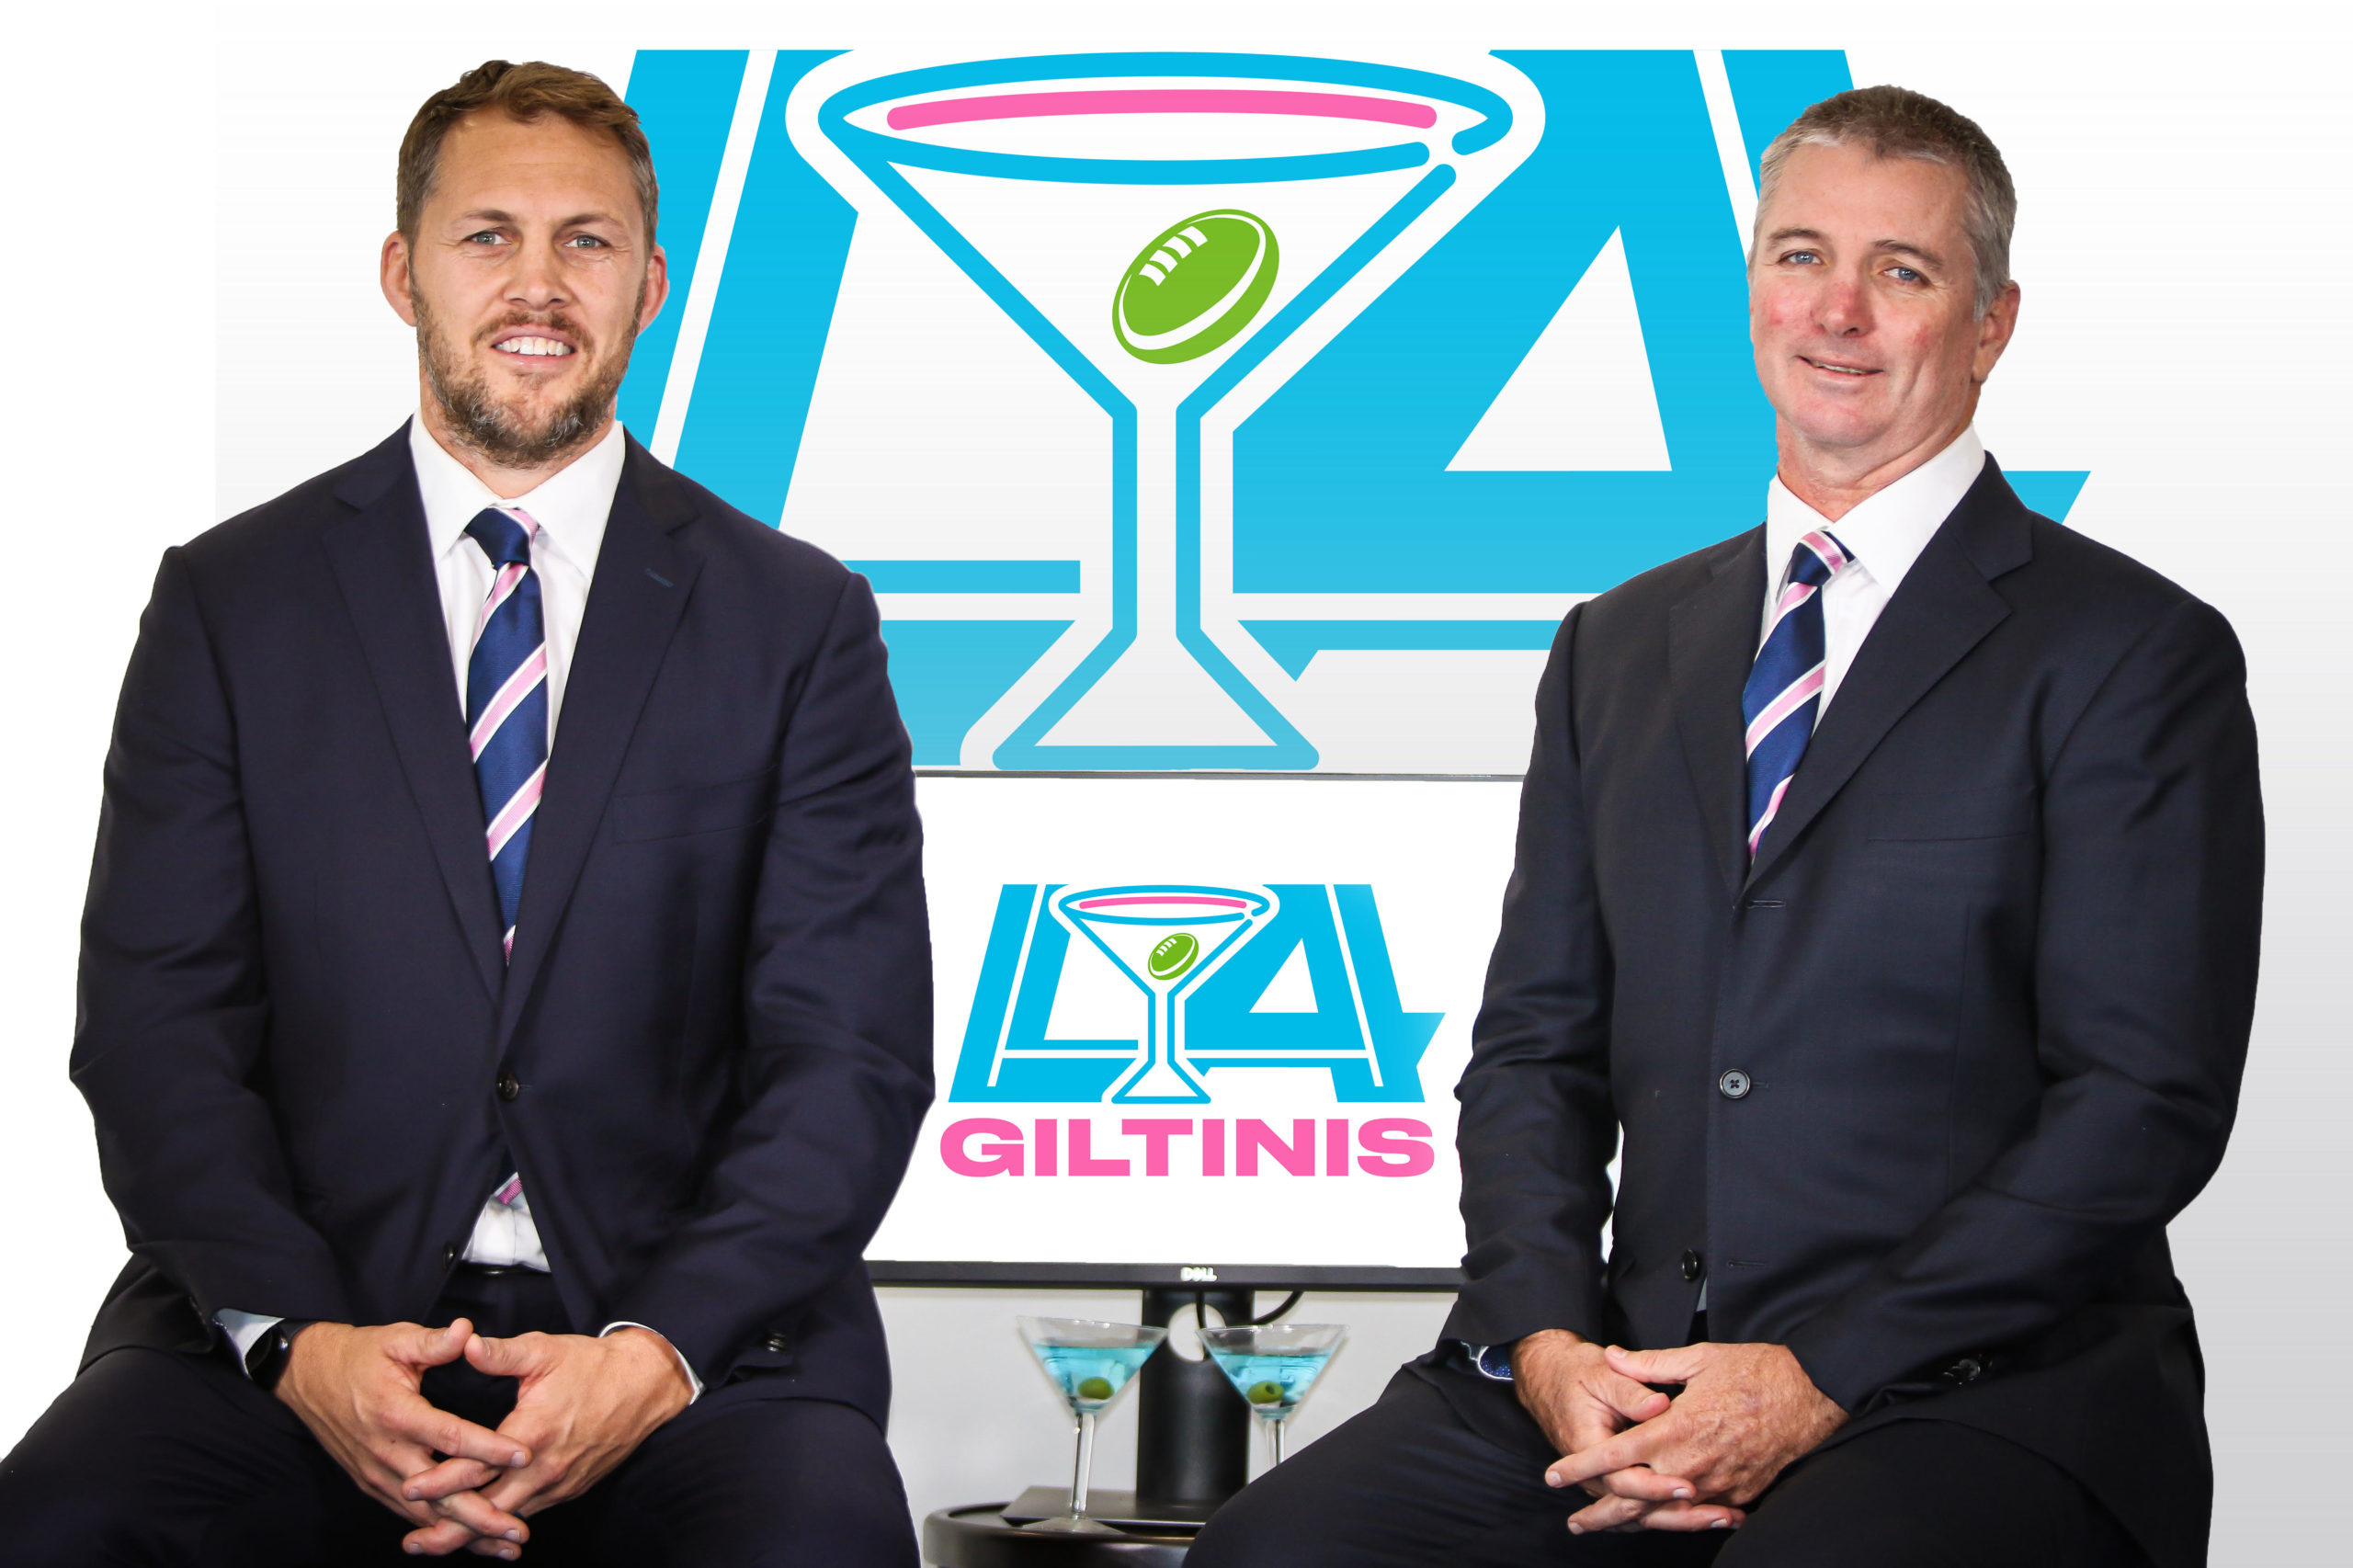 Major League Rugby Officially Welcomes The La Giltinis Major League Rugby